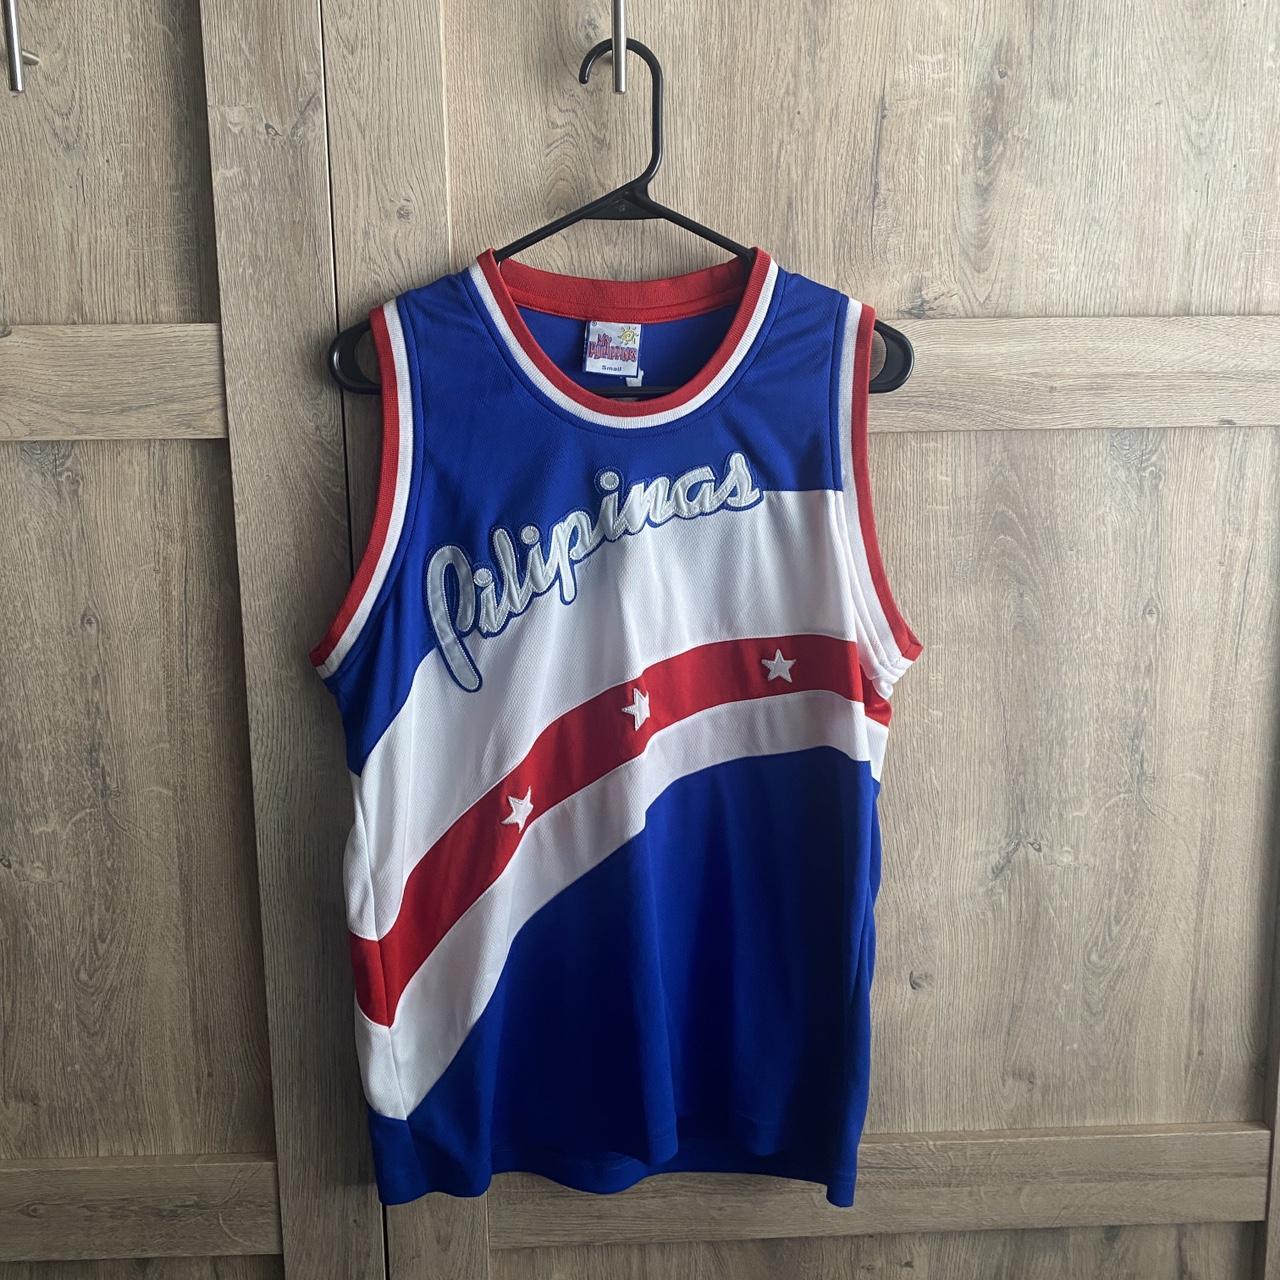 Philippines Basketball Jersey 